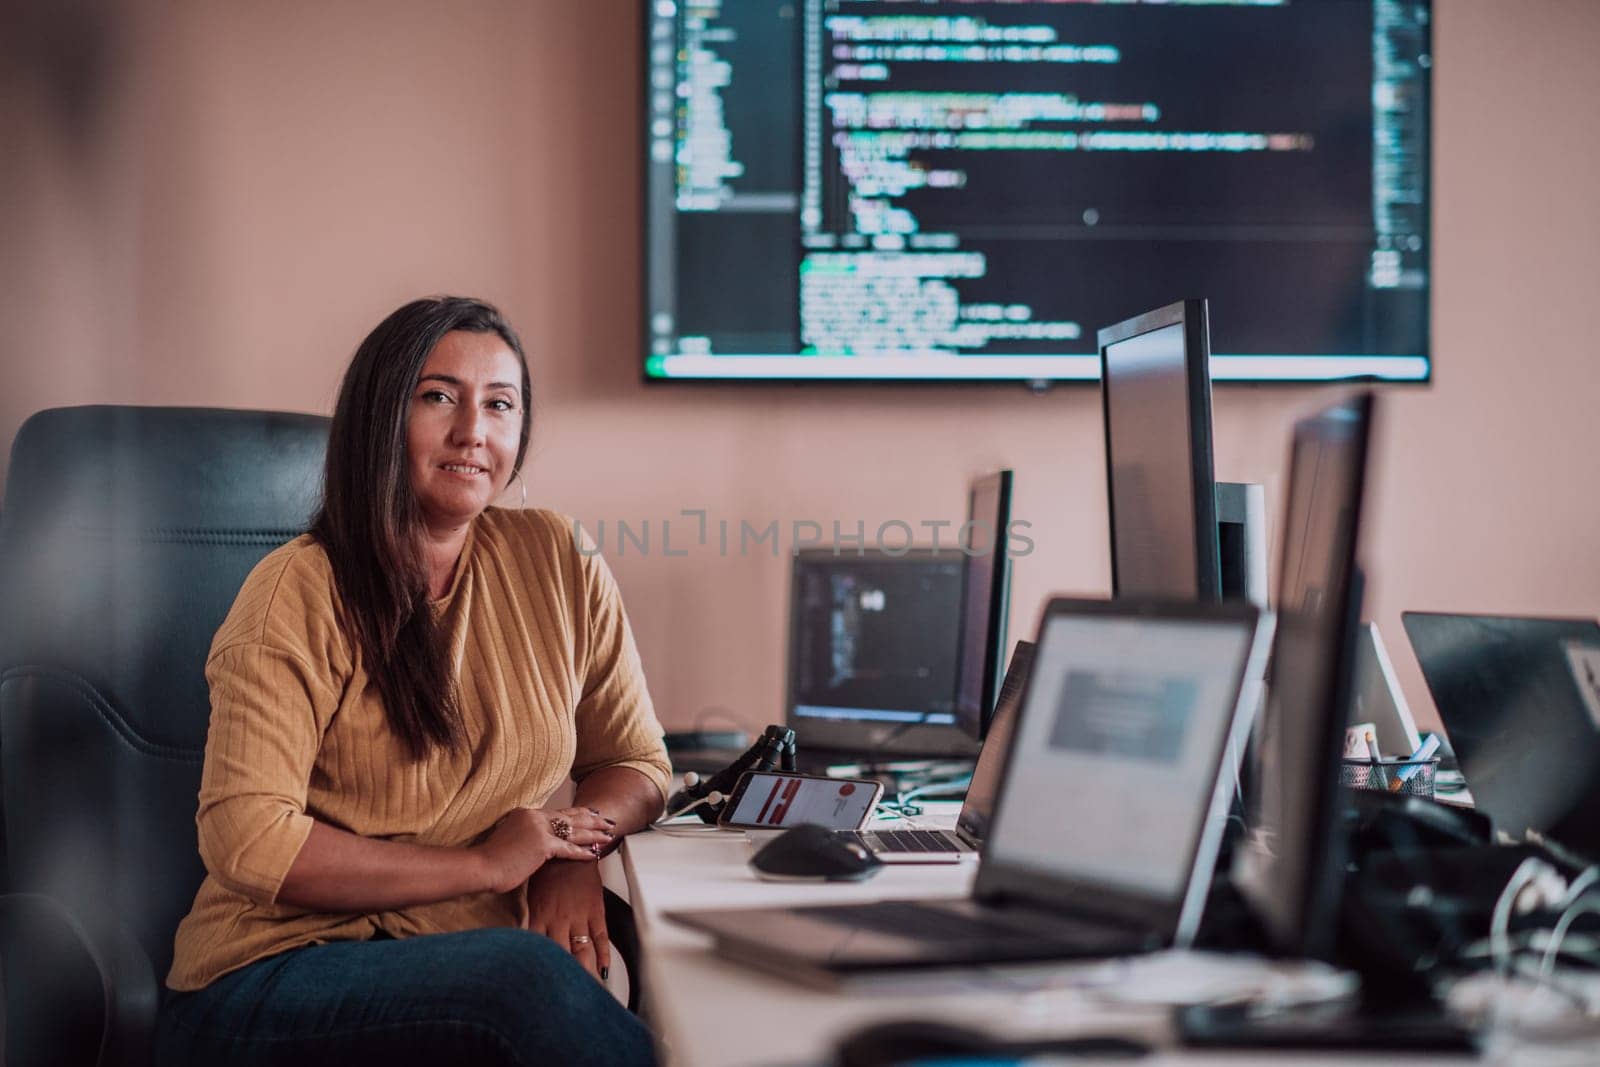 A businesswoman sitting in a programmer's office surrounded by computers, showing her expertise and dedication to technology